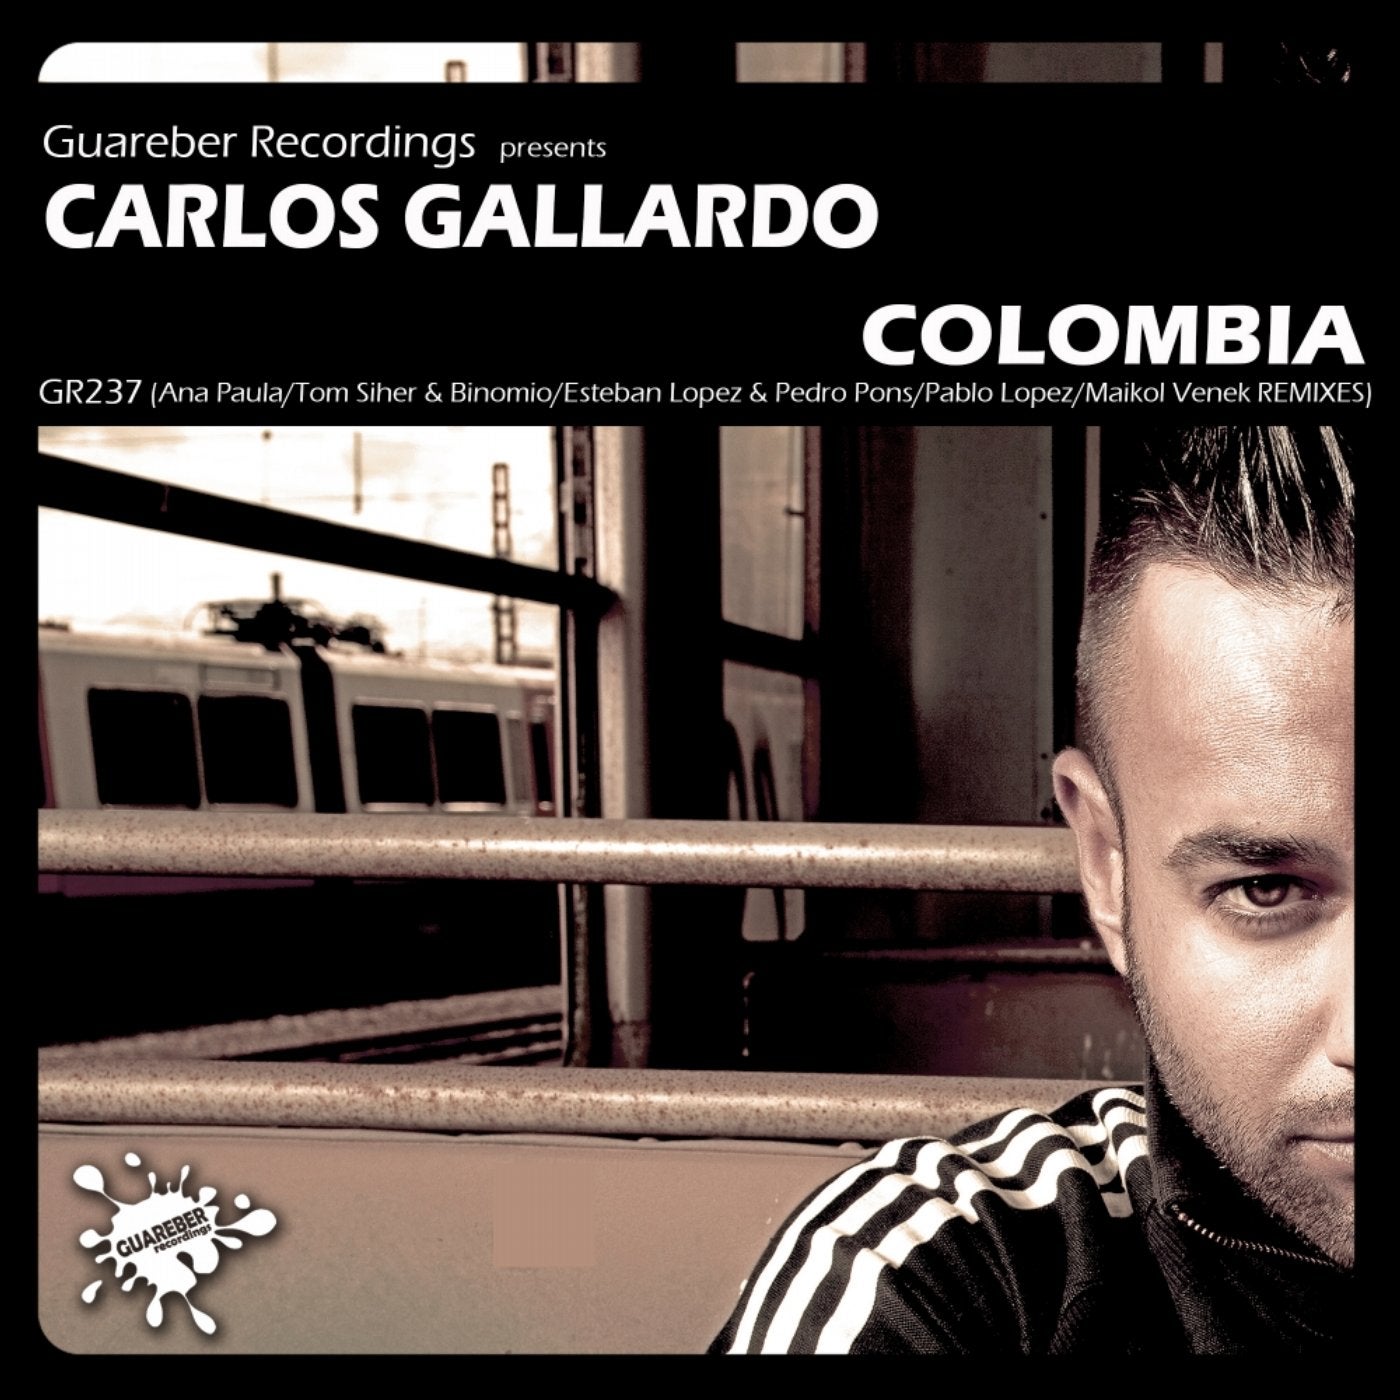 Colombia Remixes